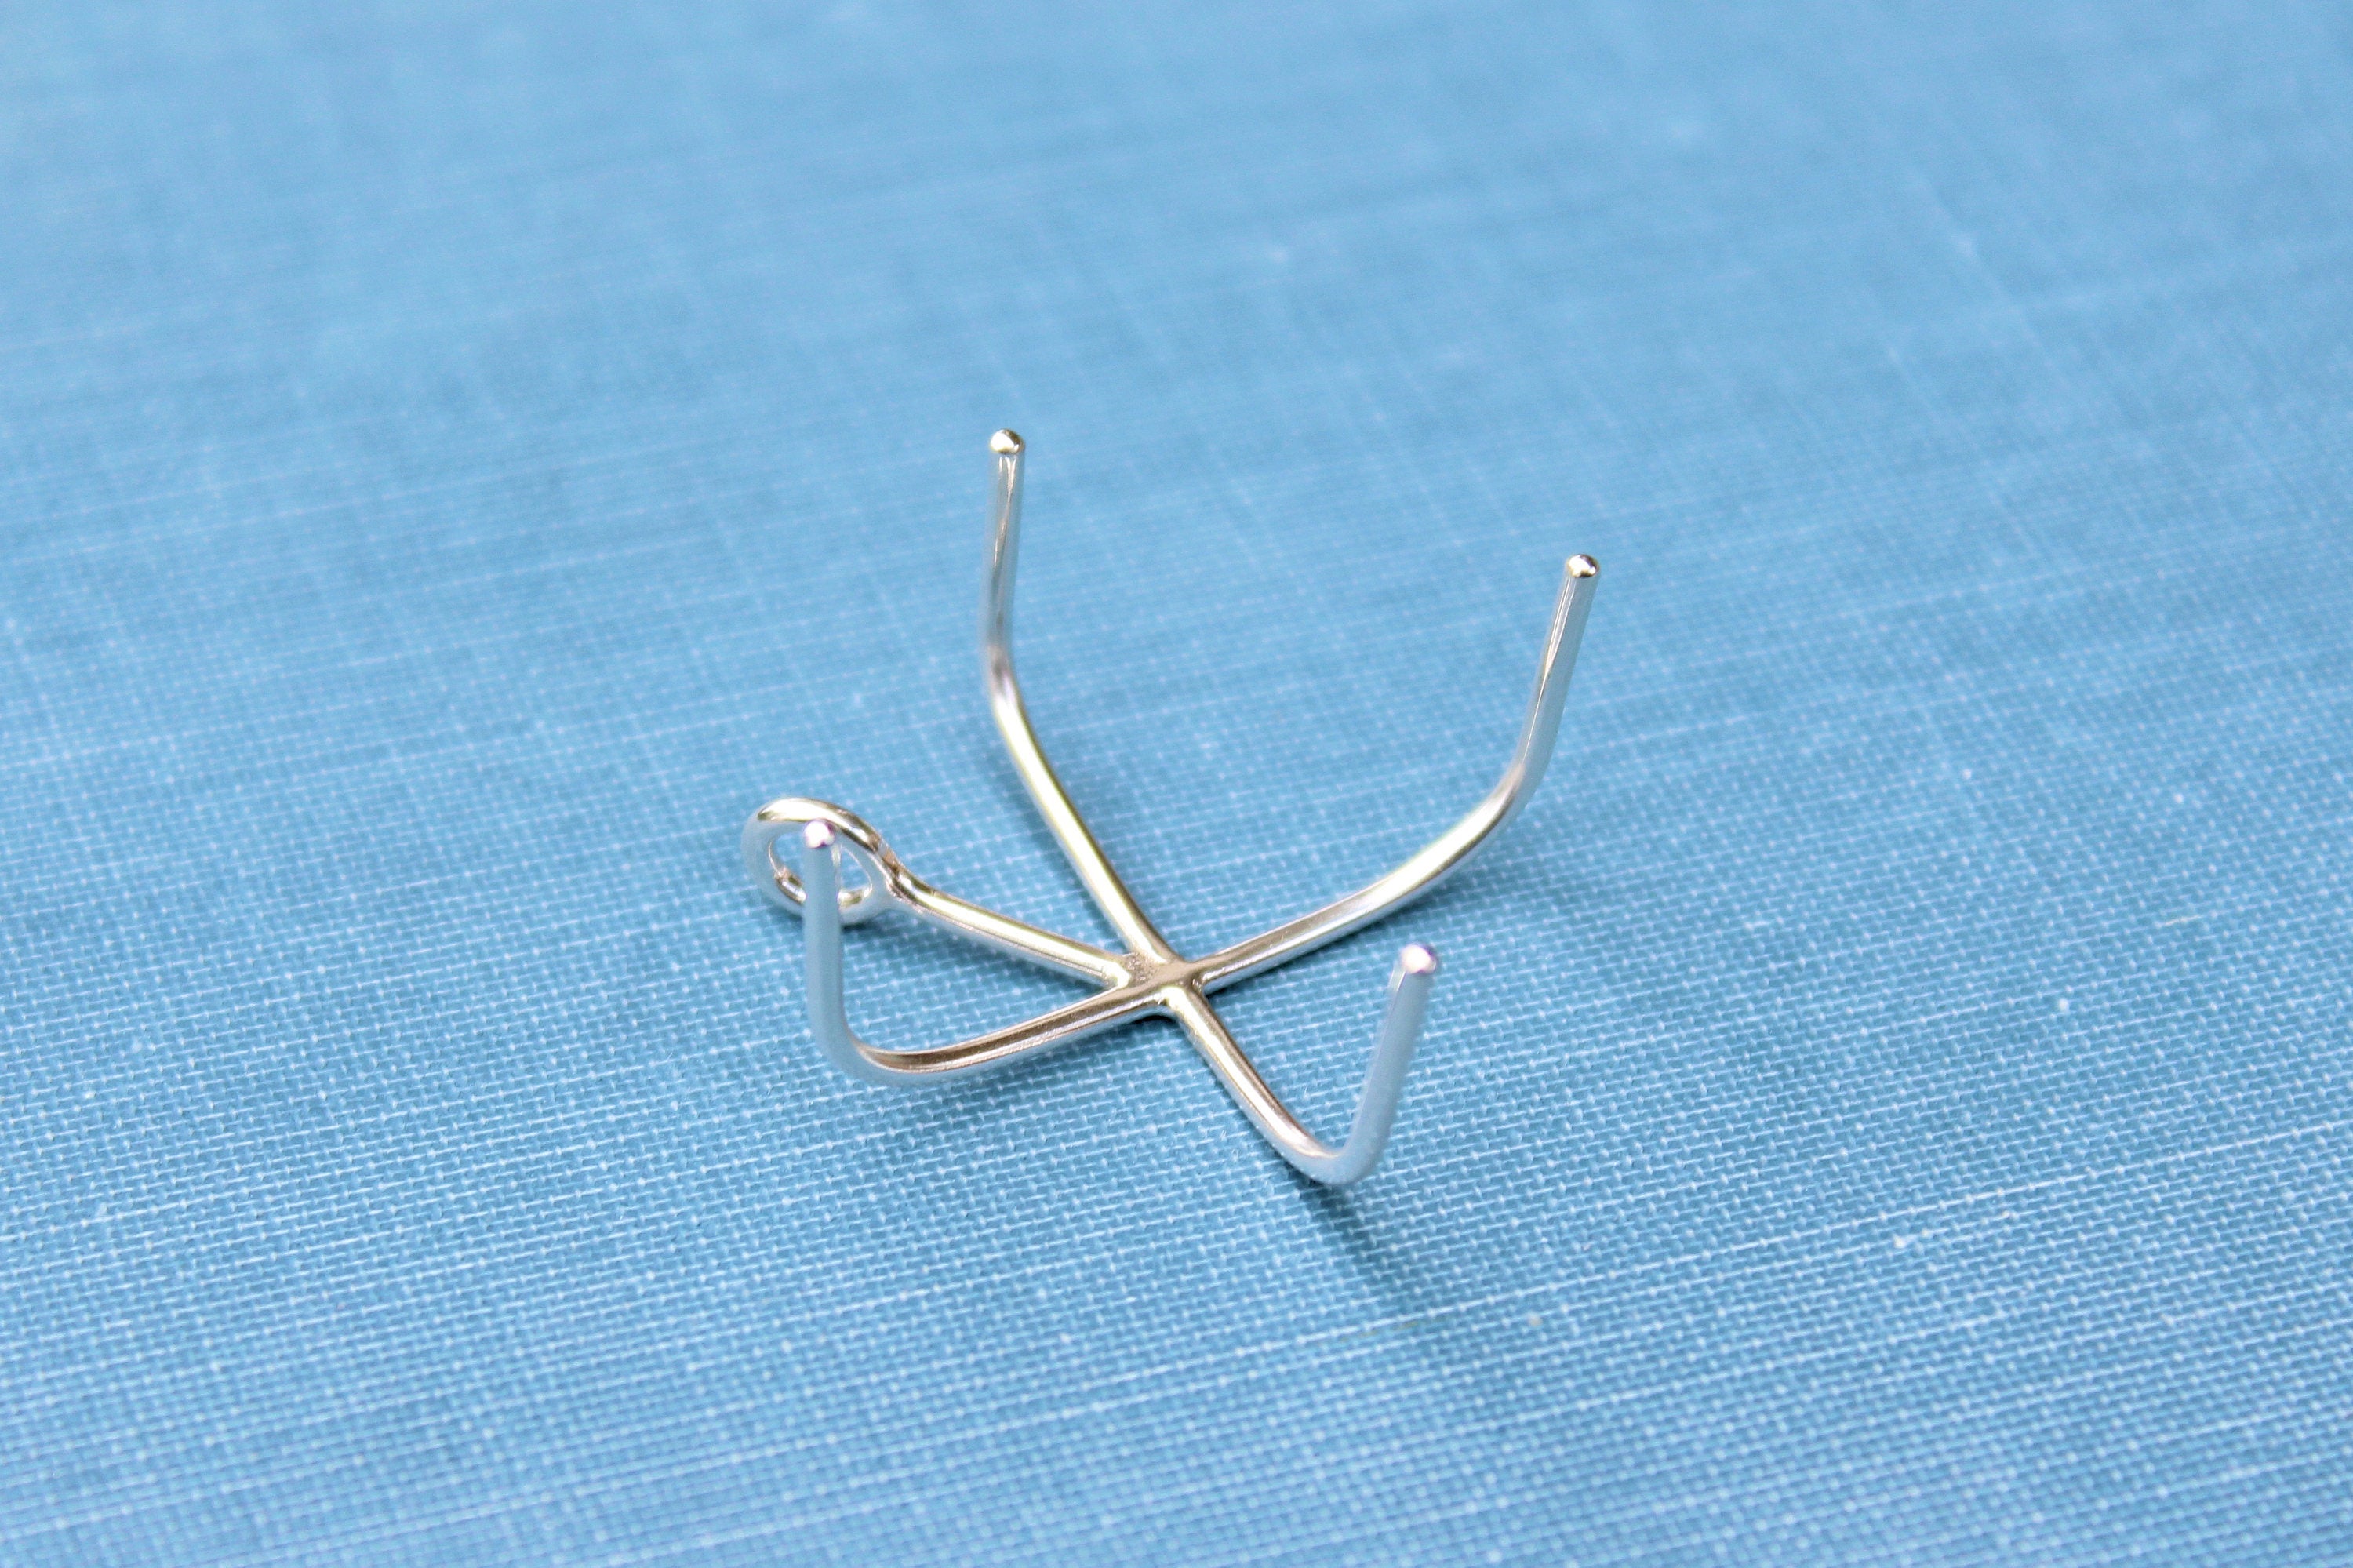 Claw Prong Raw Stone Pendant Blank, Silver 4 Prong, Wholesale Blanks, Raw Stones, Pendant, DIY Jewelry, Silver Blanks, Jewelry Supplies